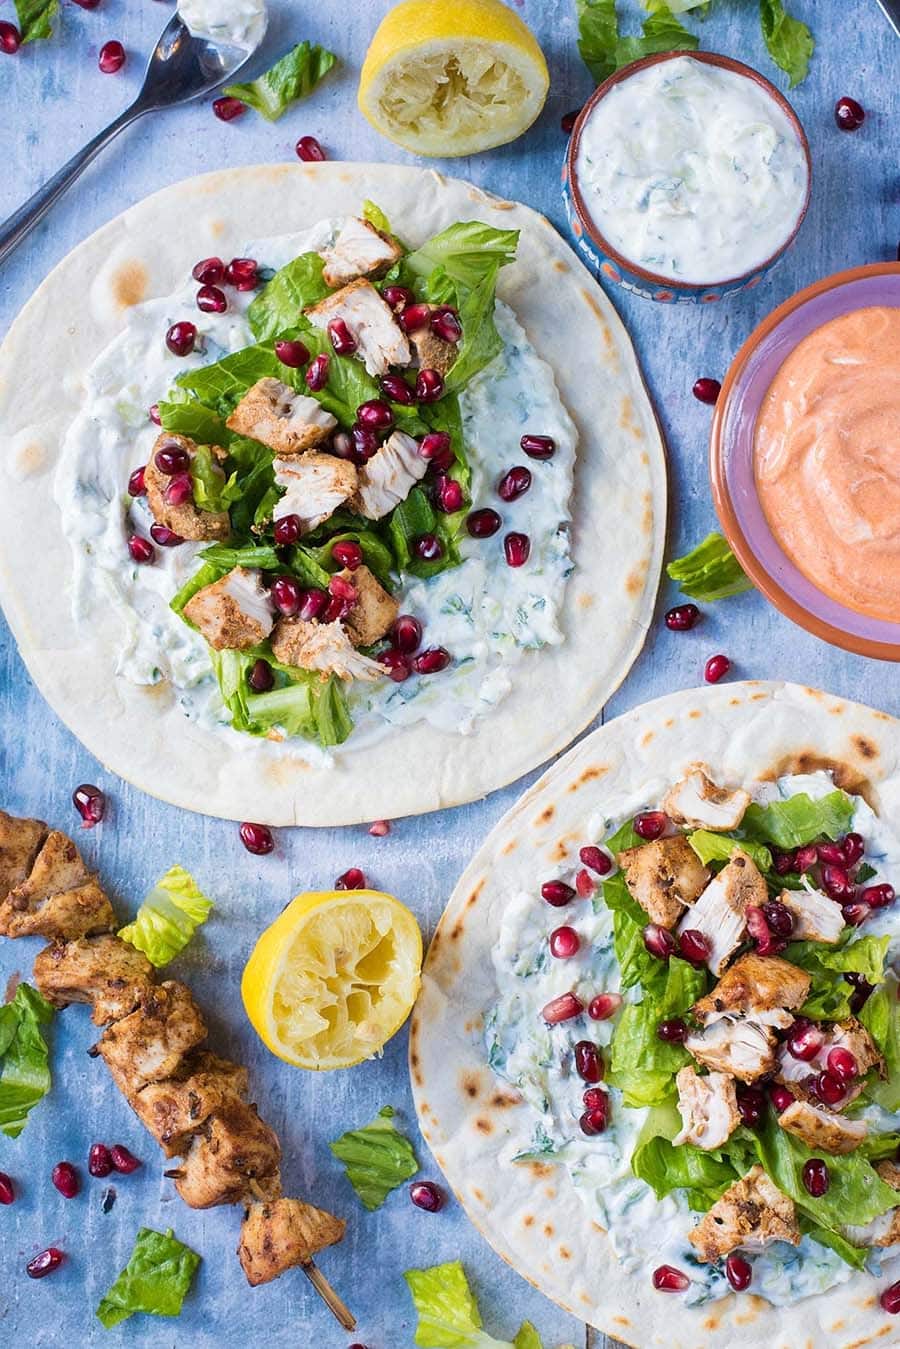 Two flatbreads covered in a white sauce, lettuce, chicken chunks and pomegranate seeds.